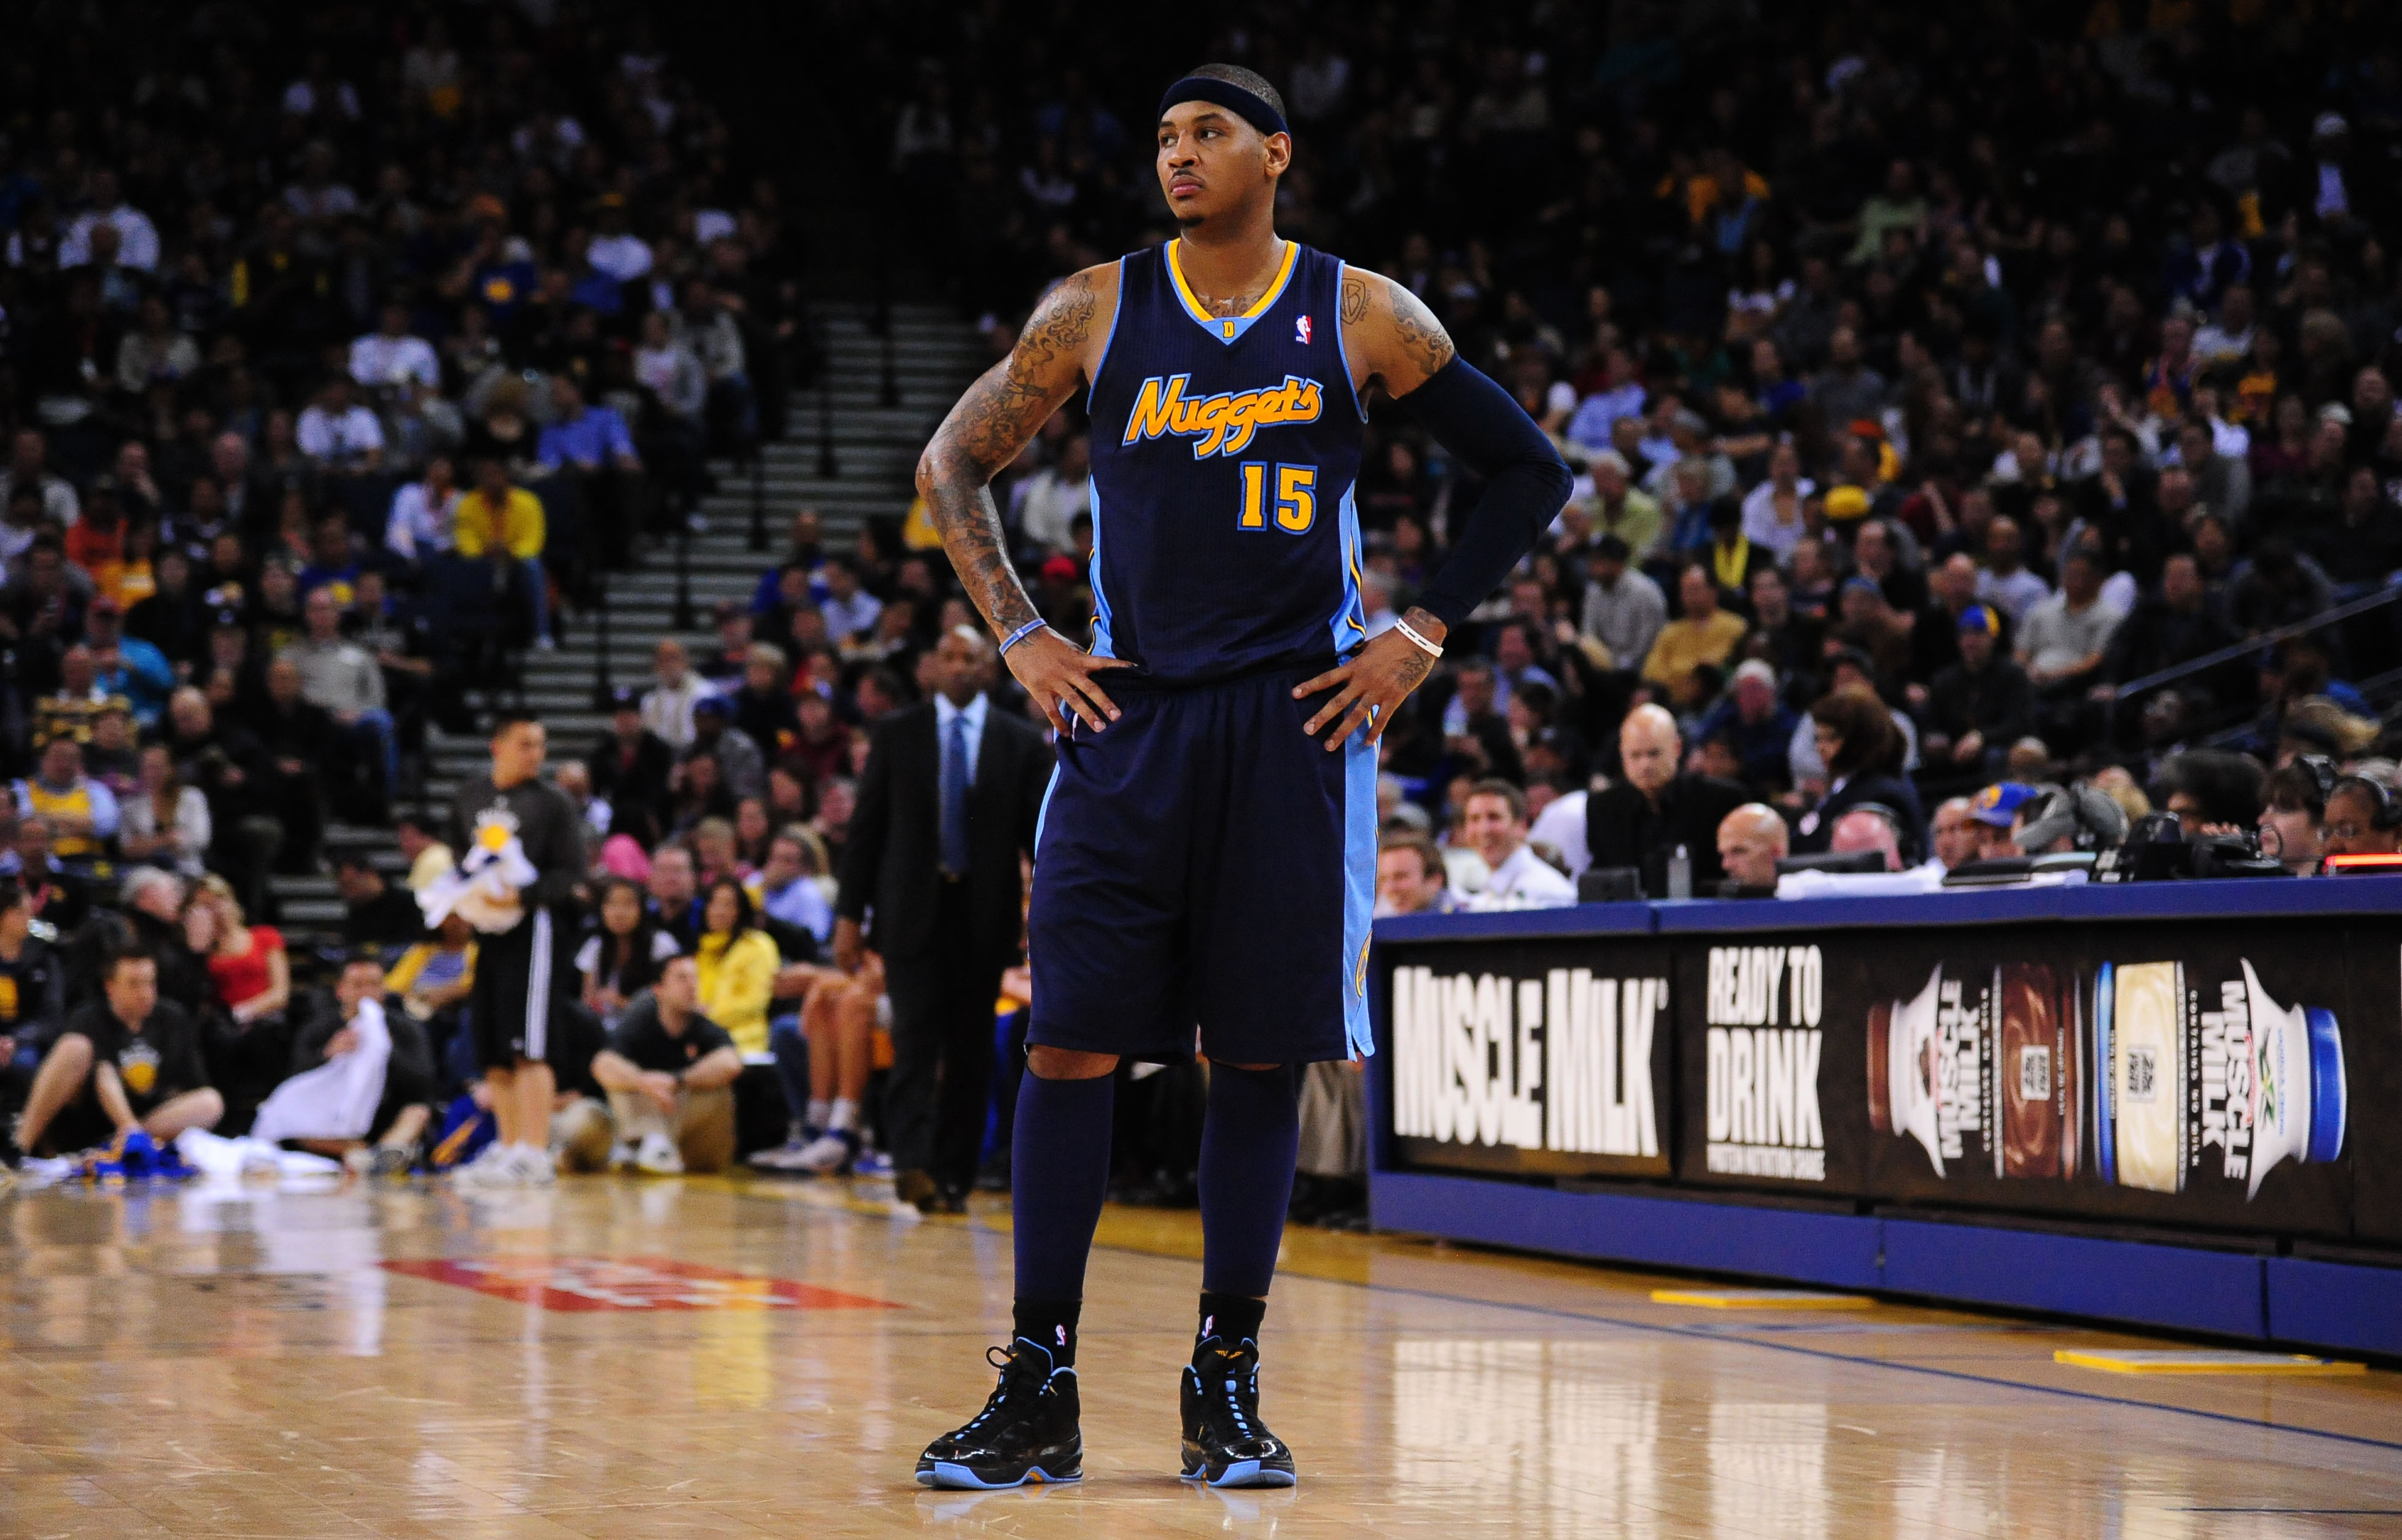 Denver Nuggets small forward Carmelo Anthony during free throws against the Golden State Warriors.